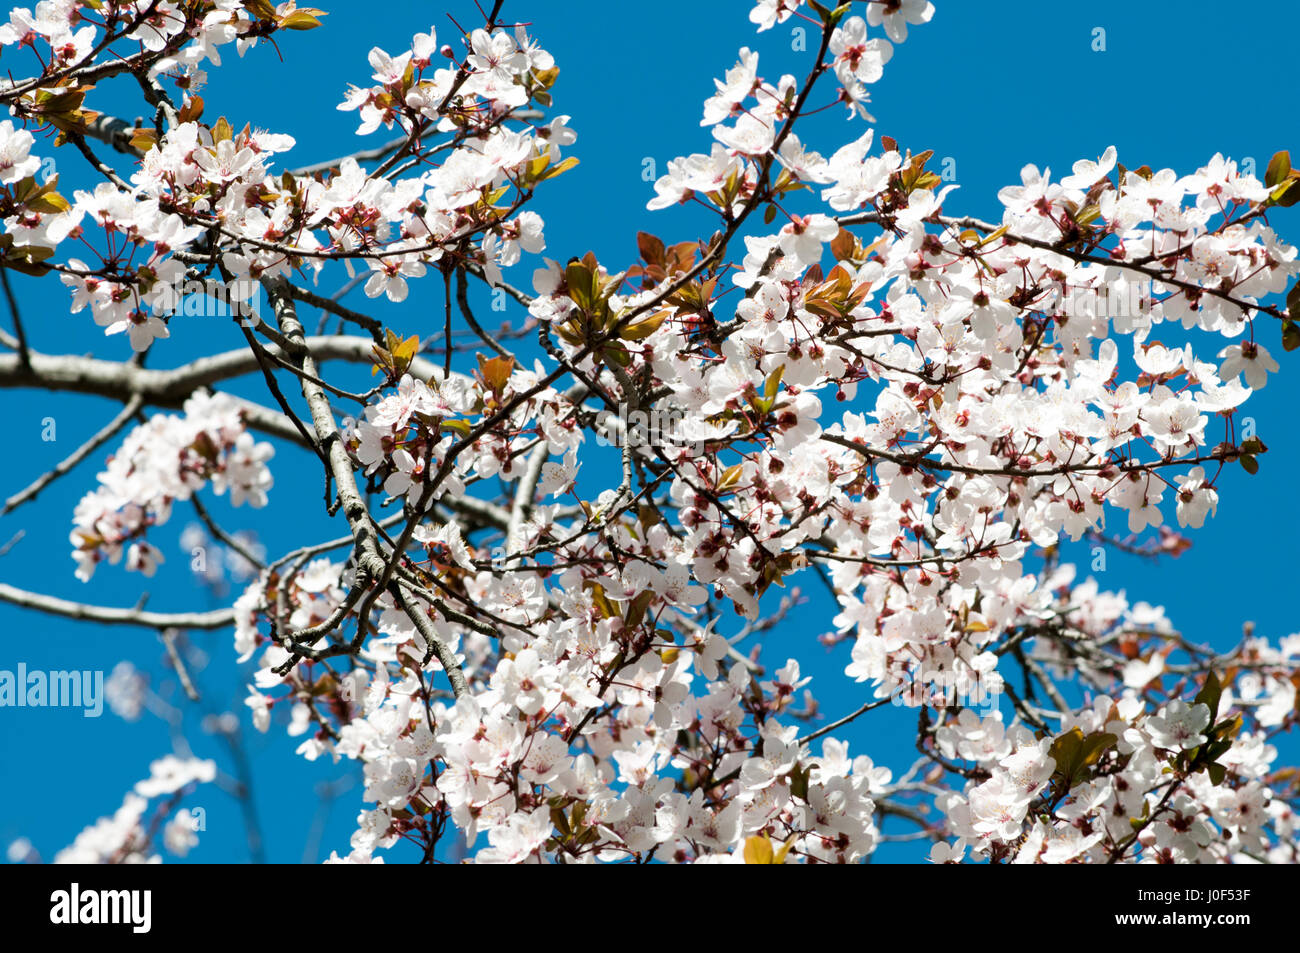 Blooming Almond tree on a blue sky background. Photographed at Parque Del Oeste, Madrid, Spain Stock Photo